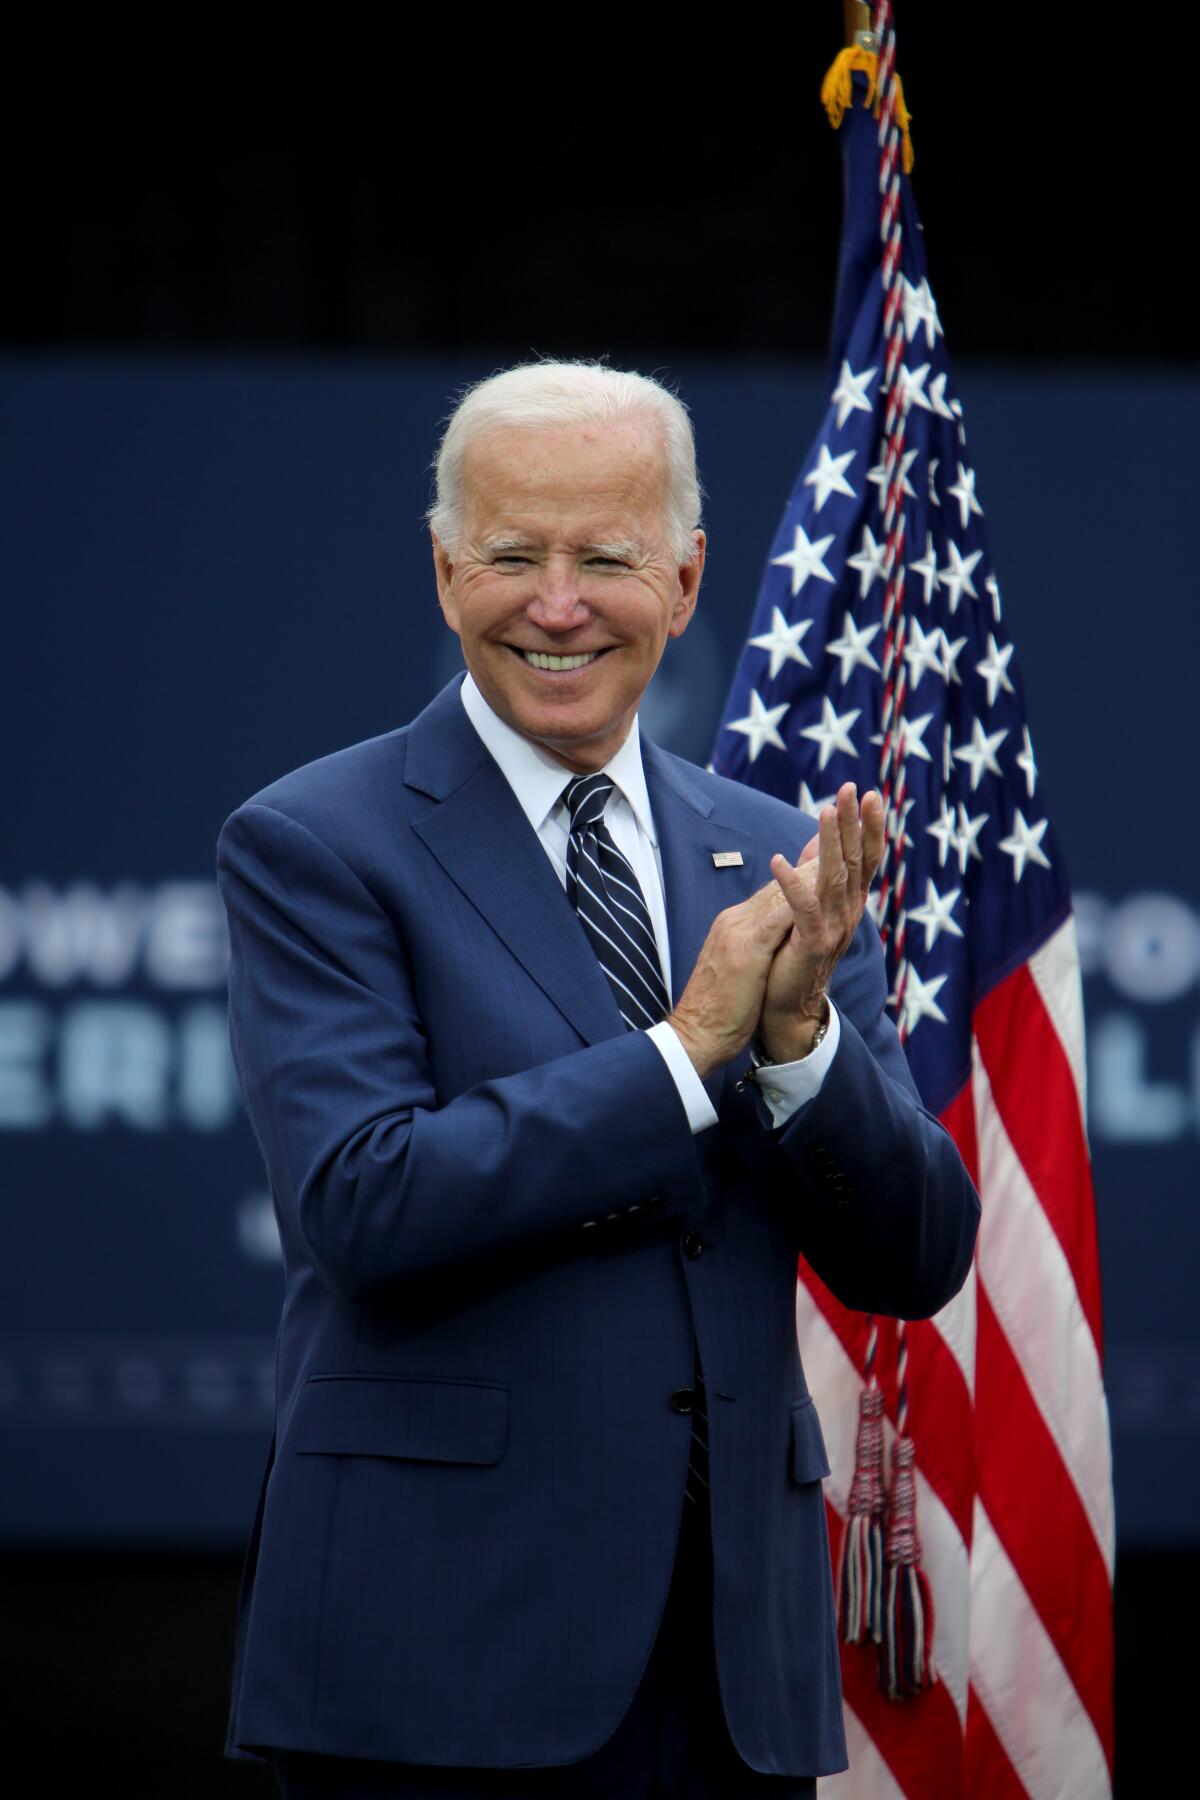 President Joe Biden spoke on lowering costs for families at Irvine Valley College on Friday.